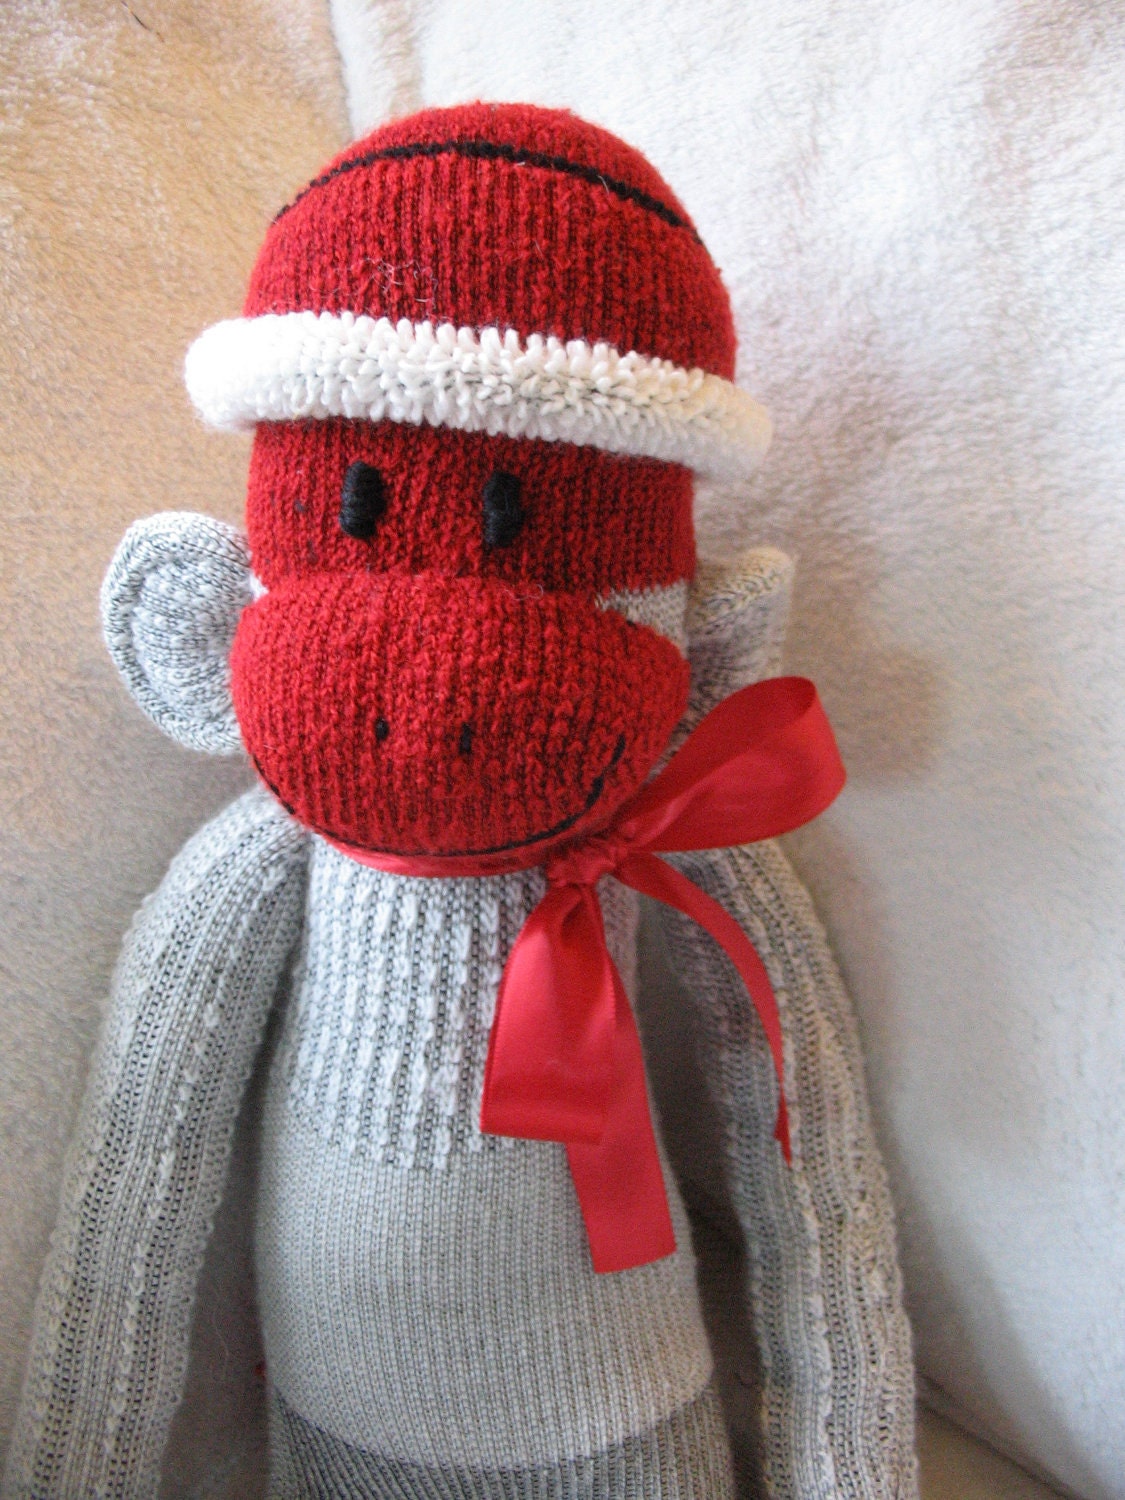 Personalized Sock Monkey. Catawba, Soft and Cuddly. Limited Edition - Large Size. - auntyanndesigns